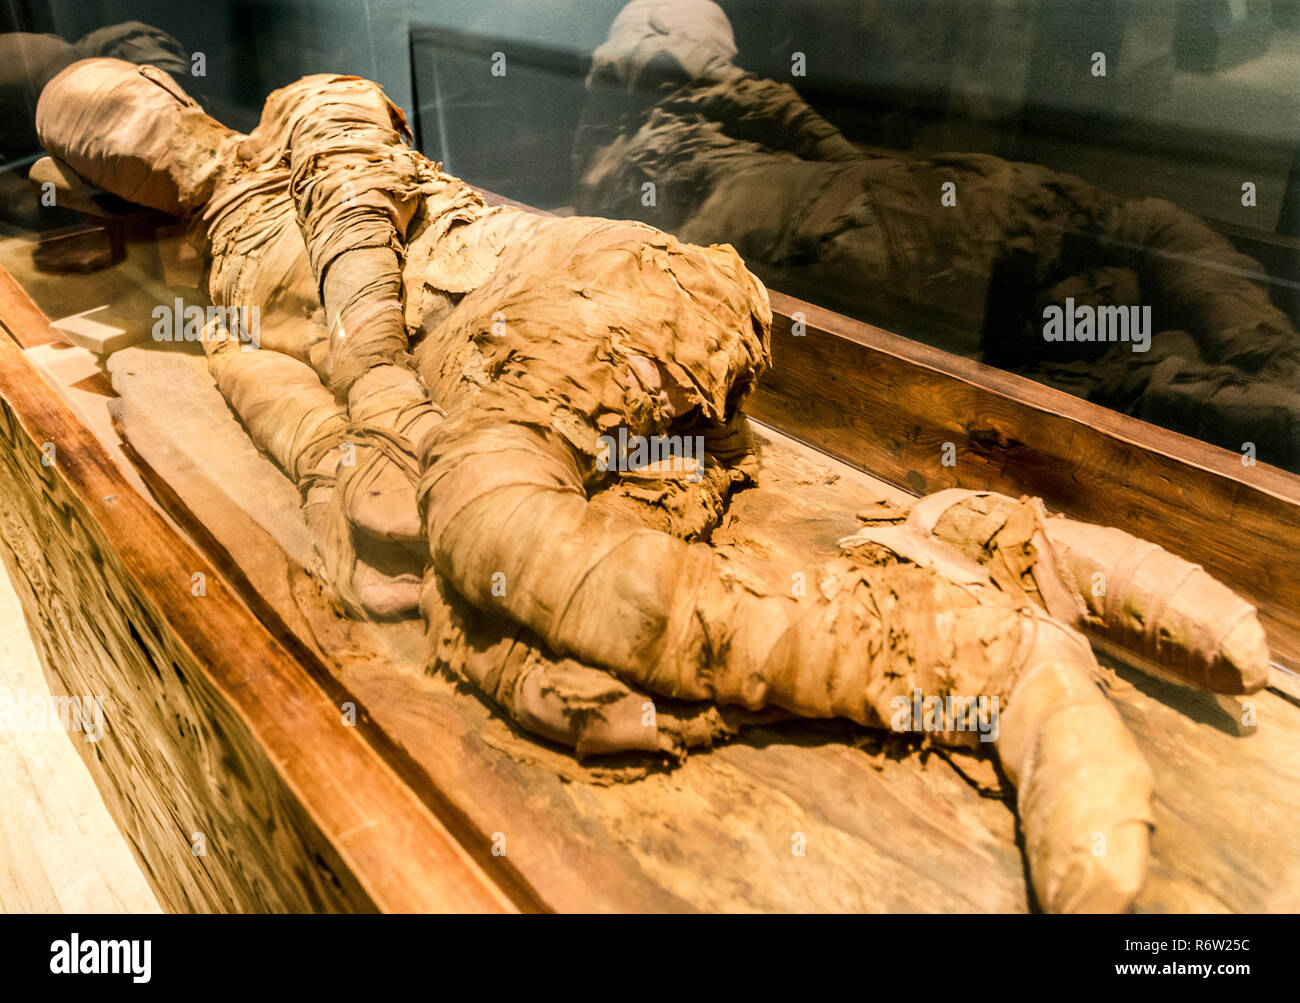 An Egyptian mummy circa 2300 B.C. reclines in a display case at the Michael C. Carlos Museum at Emory University, July 8, 2014, in Atlanta, Georgia. Stock Photo